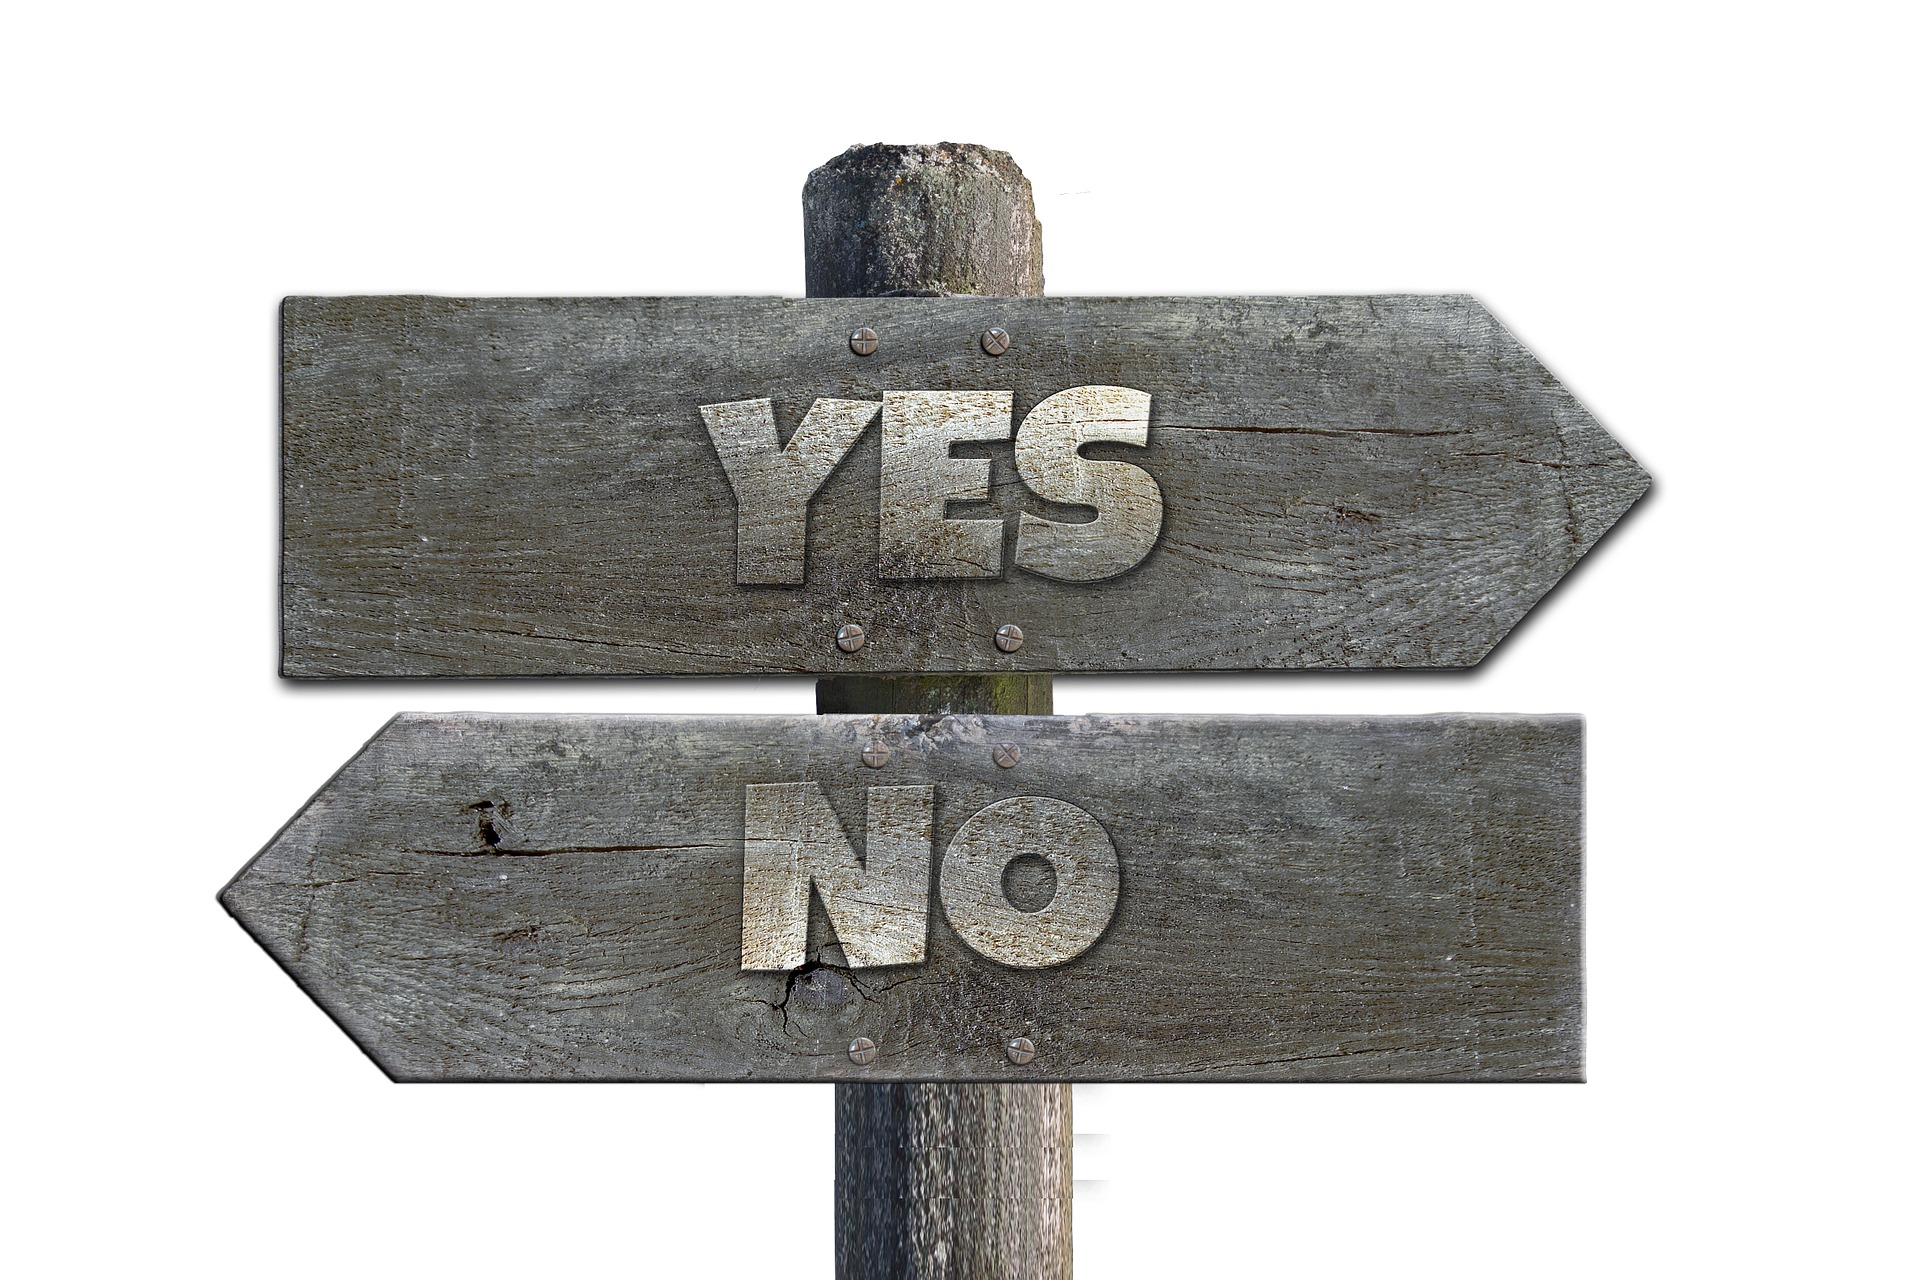 Signpost showing yes in one direction and no in the opposite direction. This is symbolising whether now may or may not be a good time to sell your business